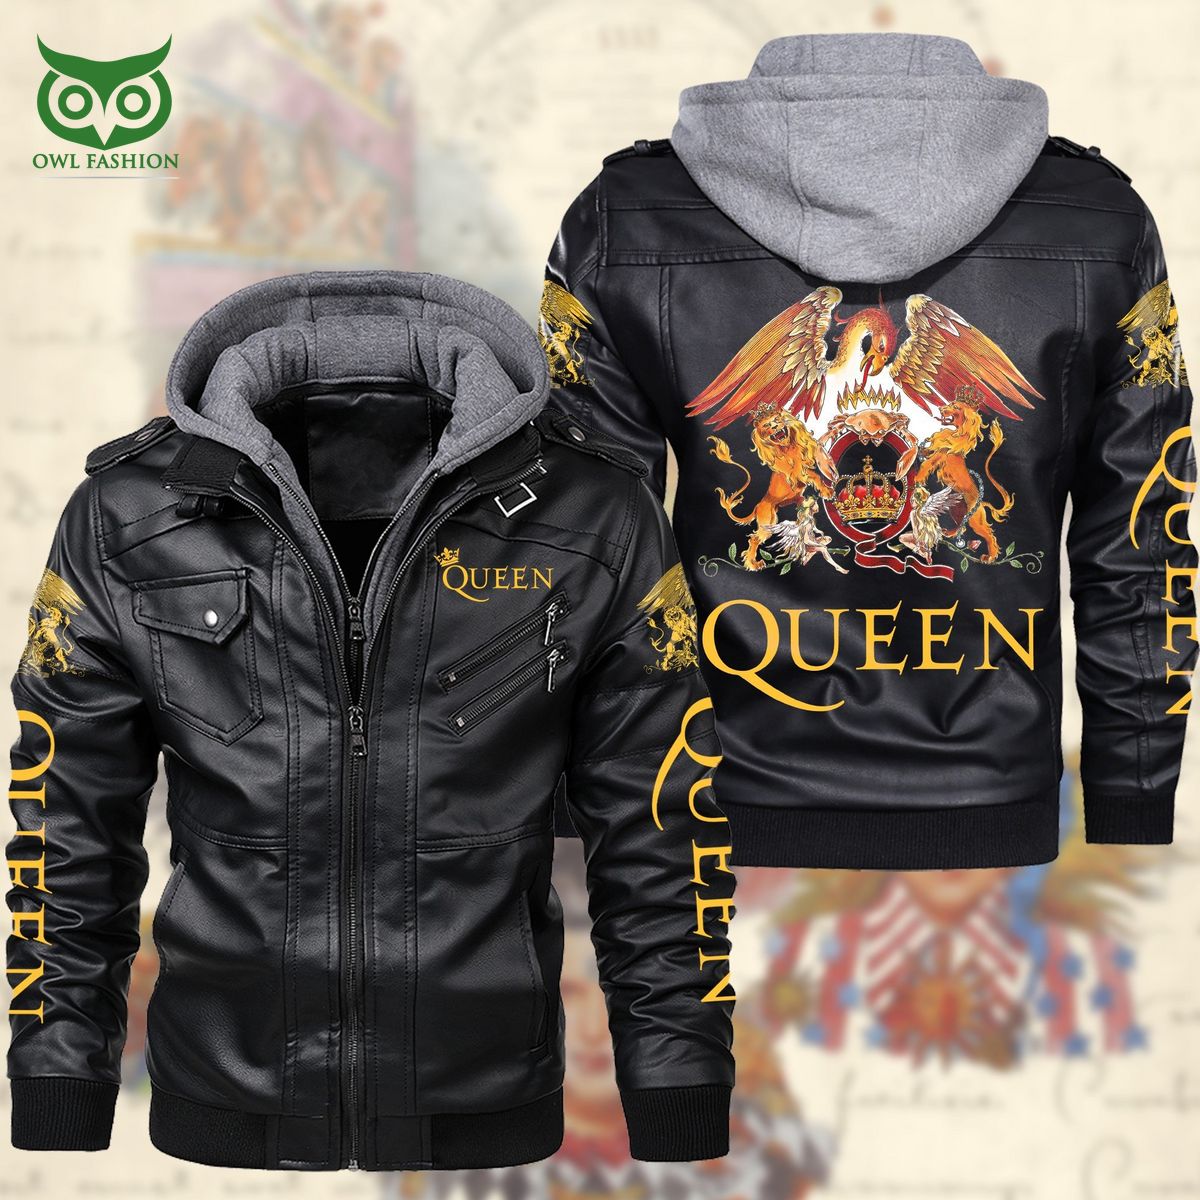 Queen British Rock Band 2D Leather Jacket Elegant picture.